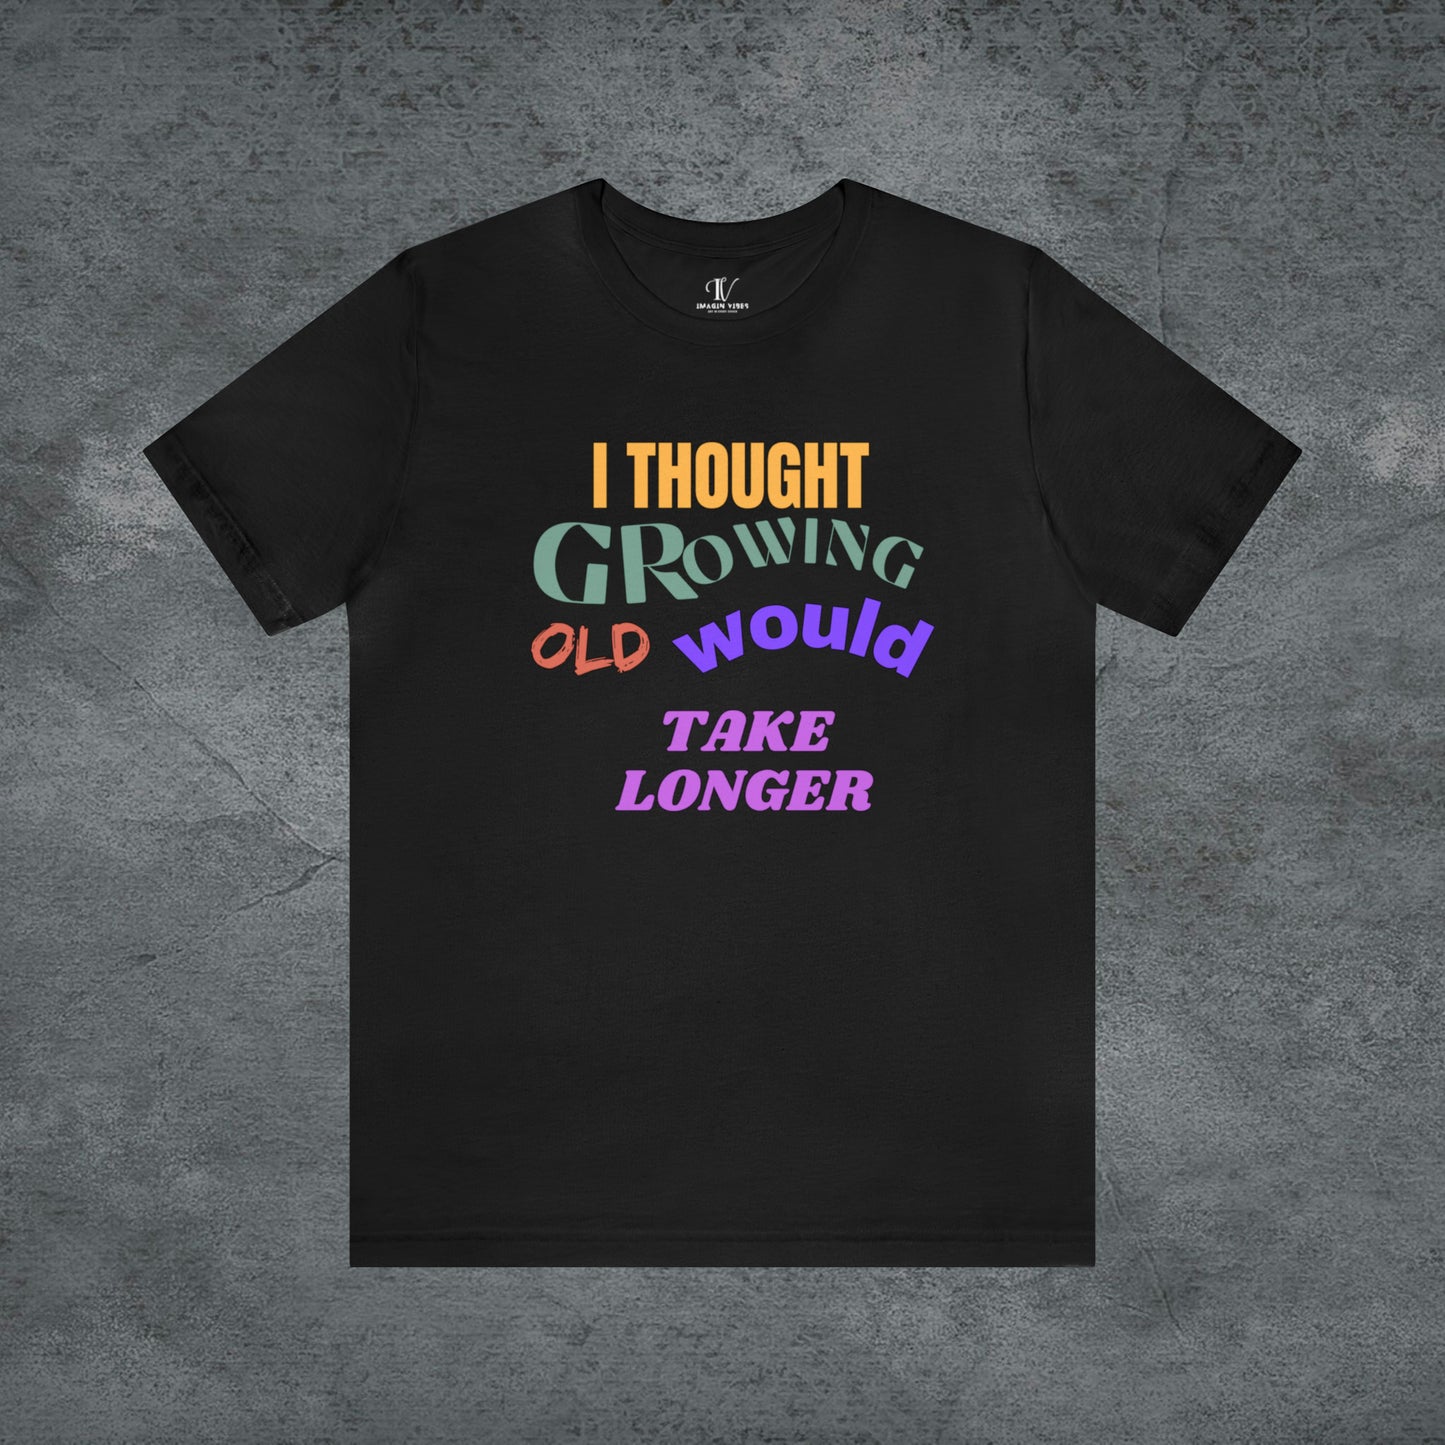 I Thought Growing Old Would Take Longer T-Shirt - Getting Older T-Shirt - Funny Adulting Tee - Old Age T-Shirt - Old Person T-Shirt T-Shirt Black S 